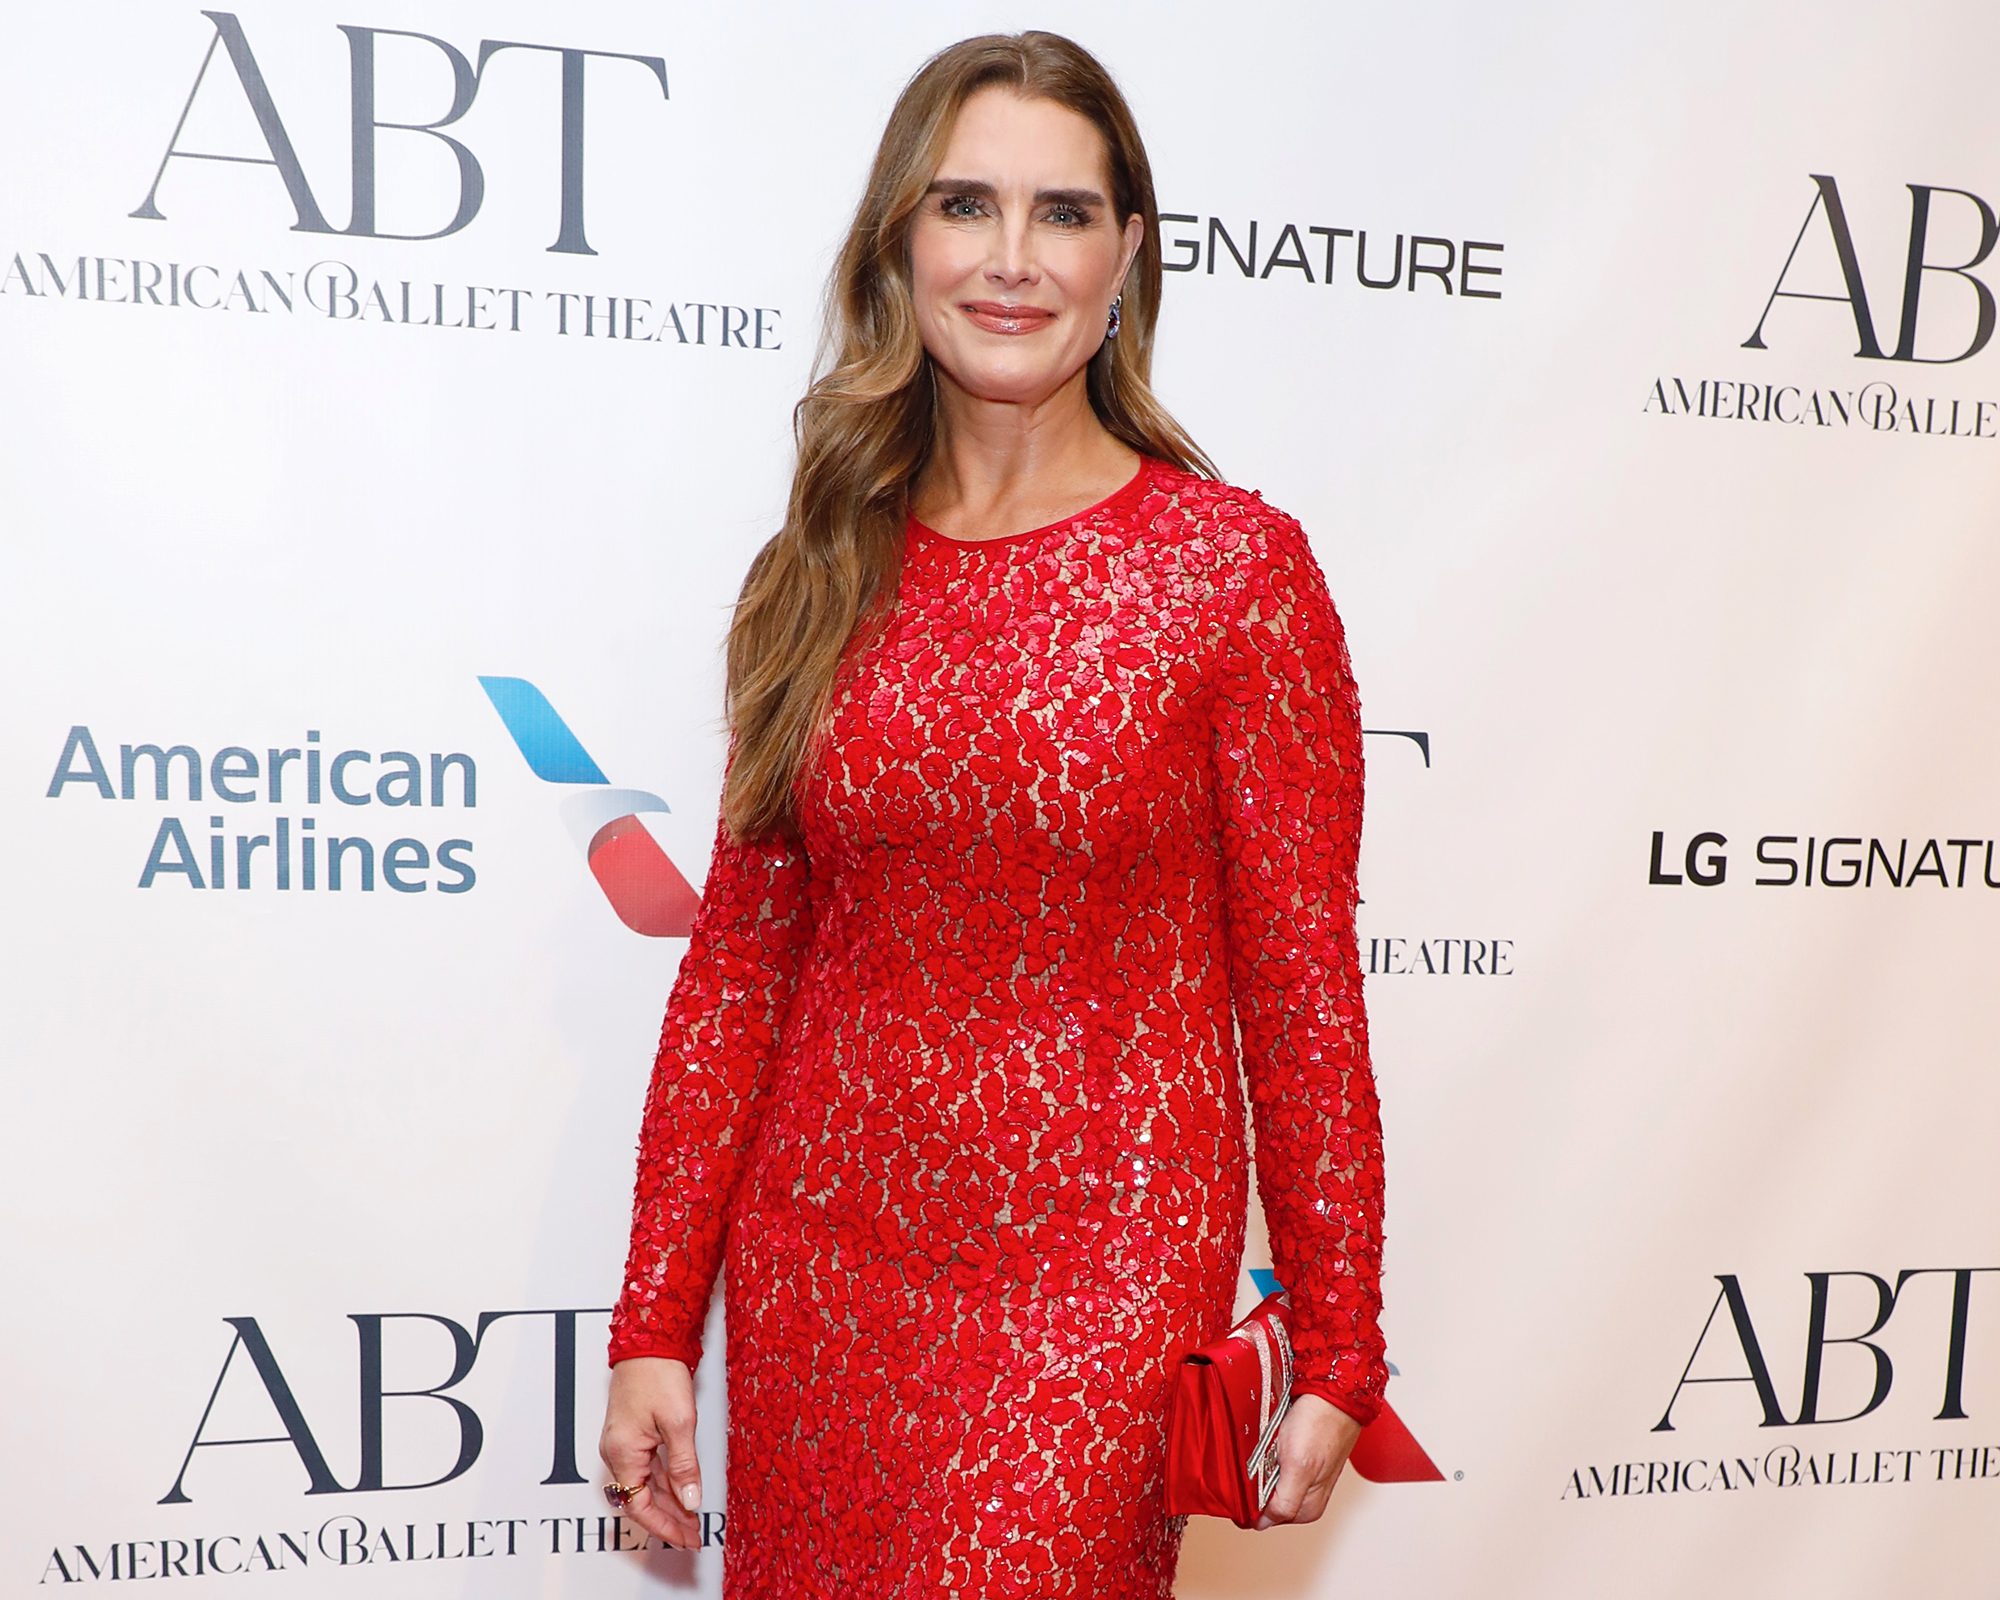 Brooke Shields Reflects on 'Shocking' Calvin Klein Ads: 'I Was Naive'